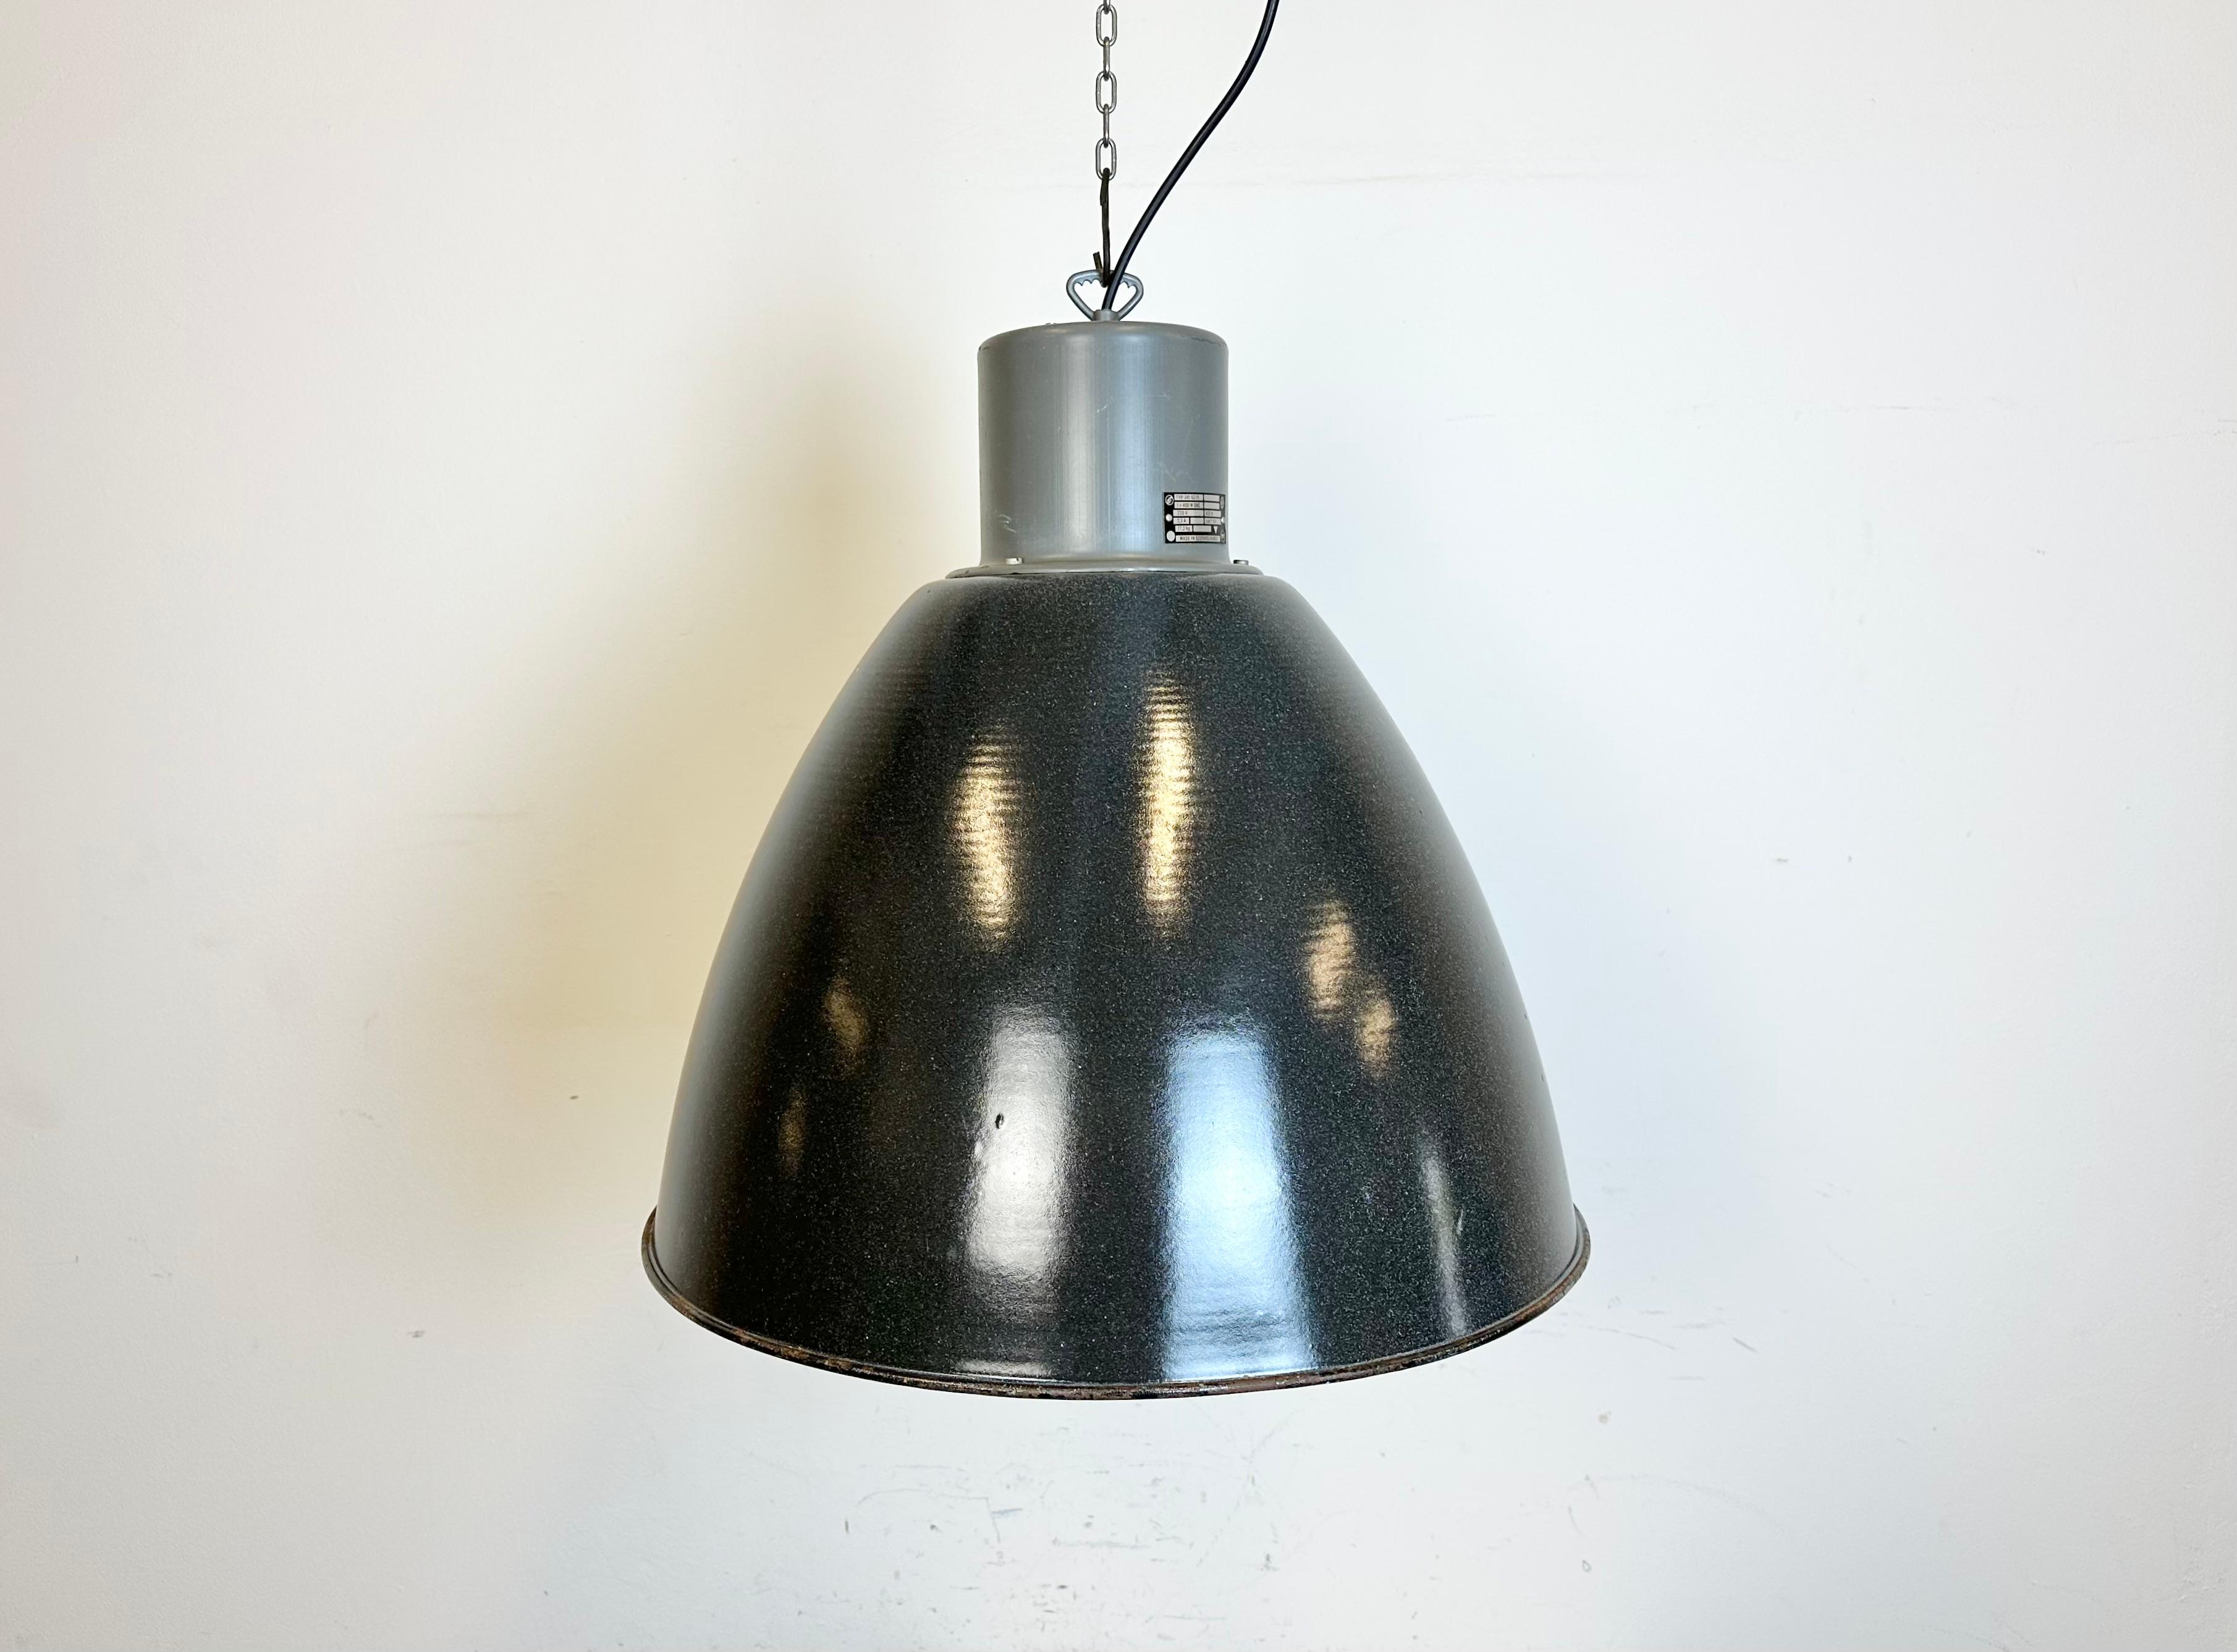 This grey Industrial pendant light was designed in the 1960s and produced by Elektrosvit in former Czechoslovakia. It features a dark grey enamel shade with white enamel interior and an iron top with hook. New porcelain socket for E 27 / E 26